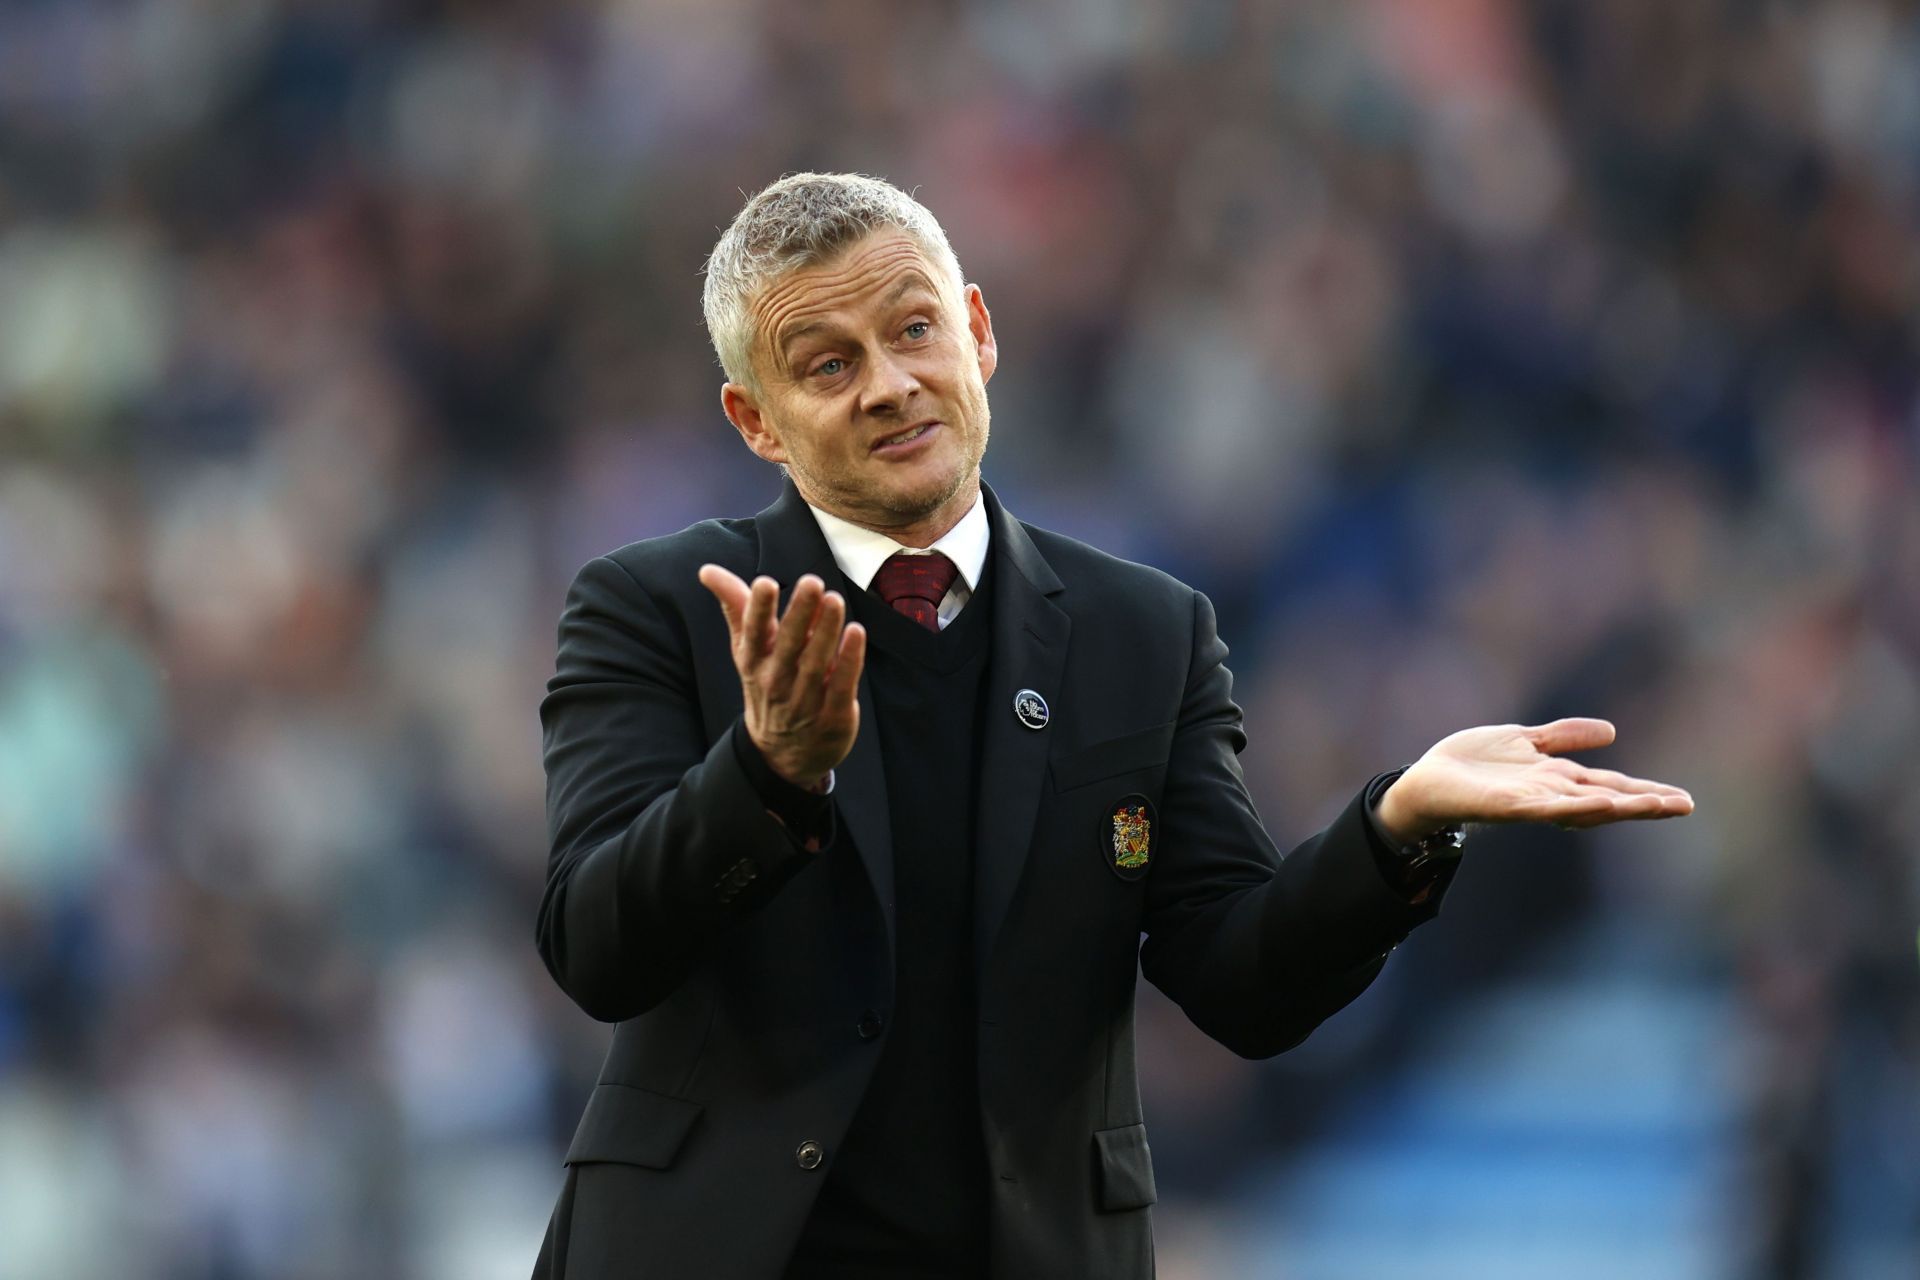 Ole Gunnar Solskjaer might be sacked in 2022.